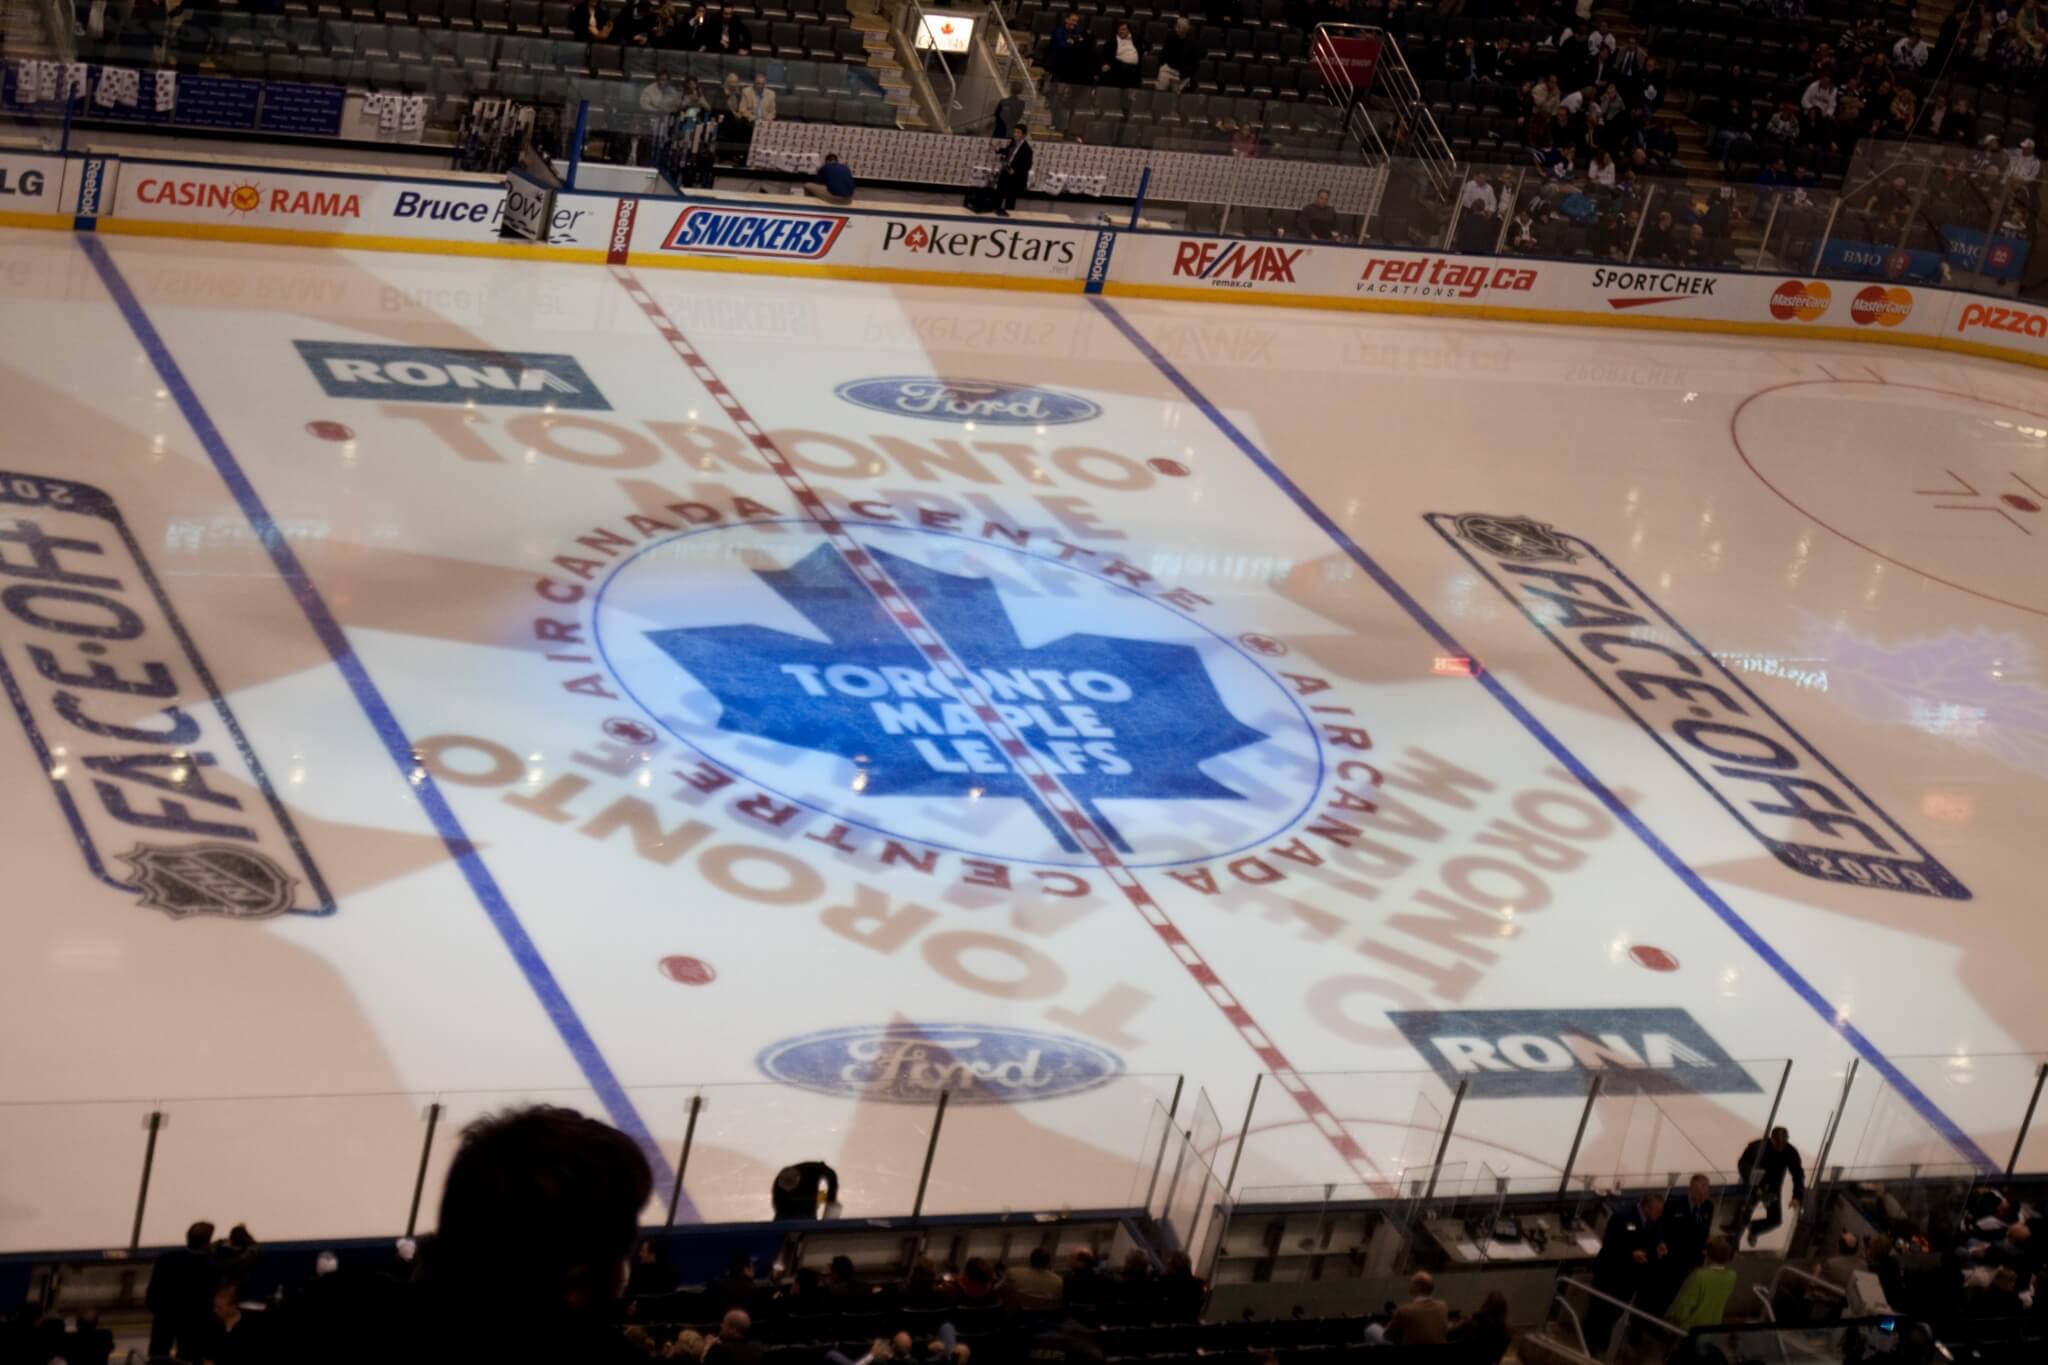 Toronto Maple Leafs arena converted to university recreation facility